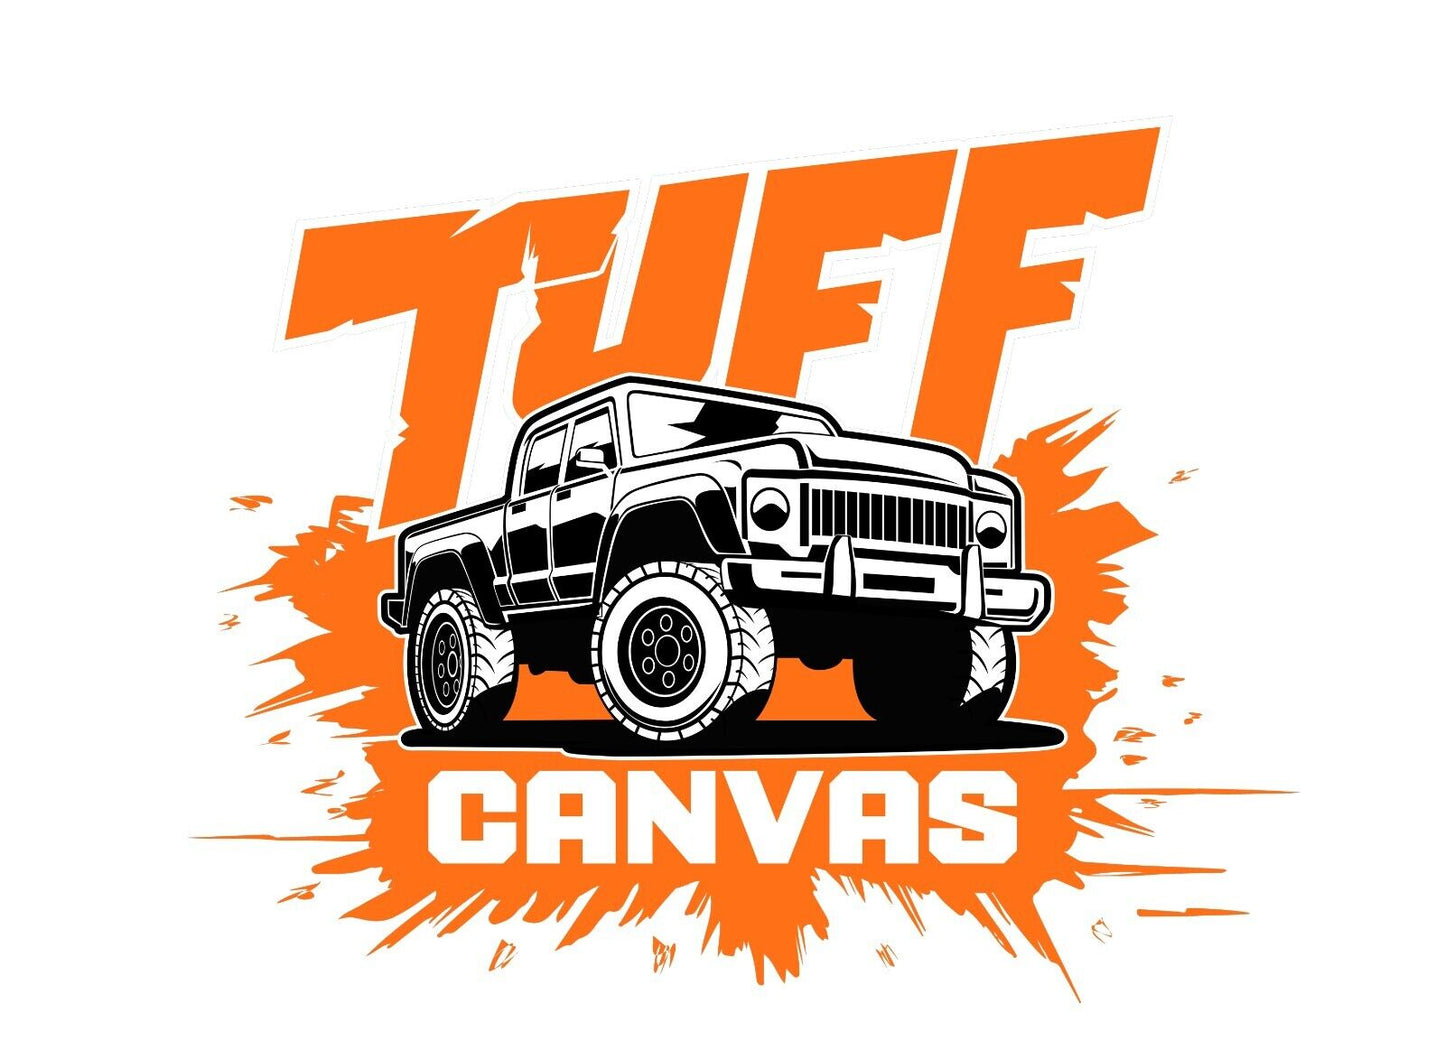 Tuff HD Canvas Seat Covers 2 Rows For Mazda BT-50 Single CAB 11/2011-2019 BT50 Charcoal